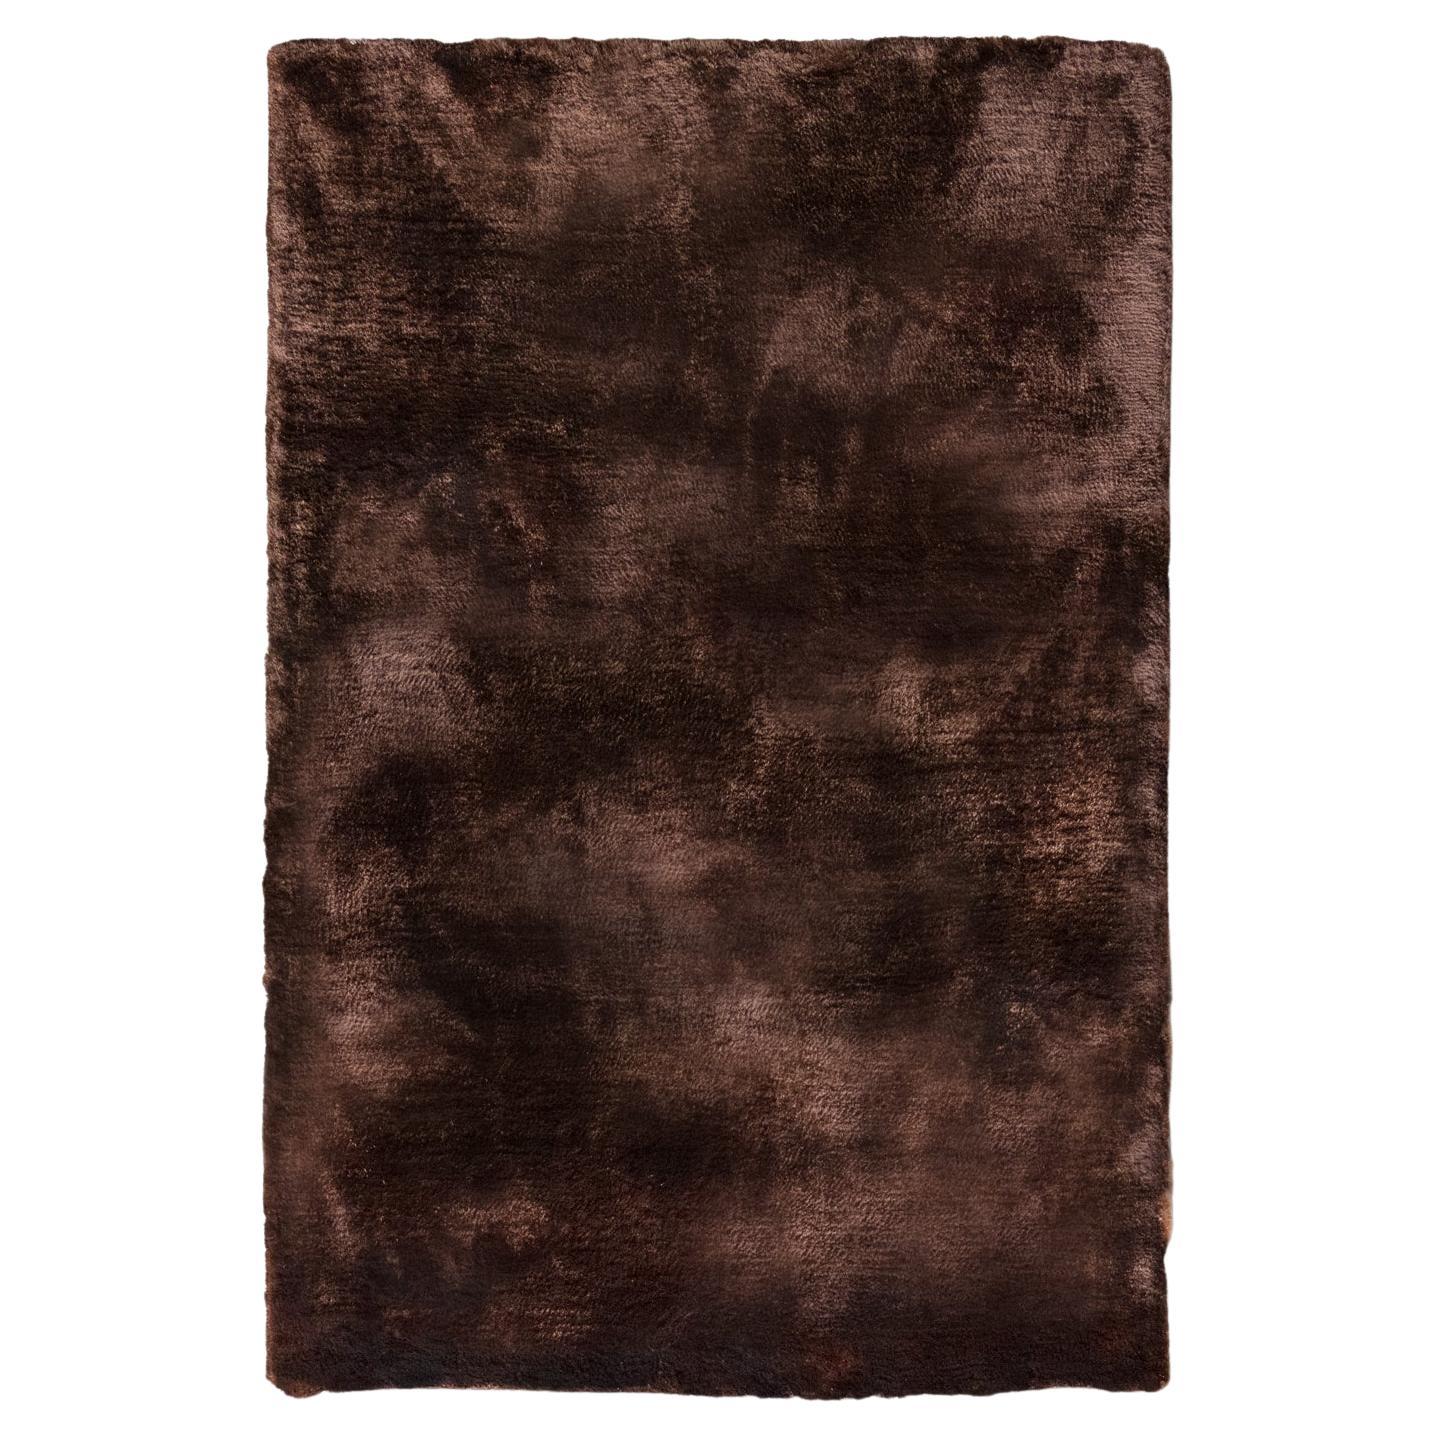 Contemporary Soft Cozy Design Brown Rug by Deanna Comellini In Stock 200x300 cm